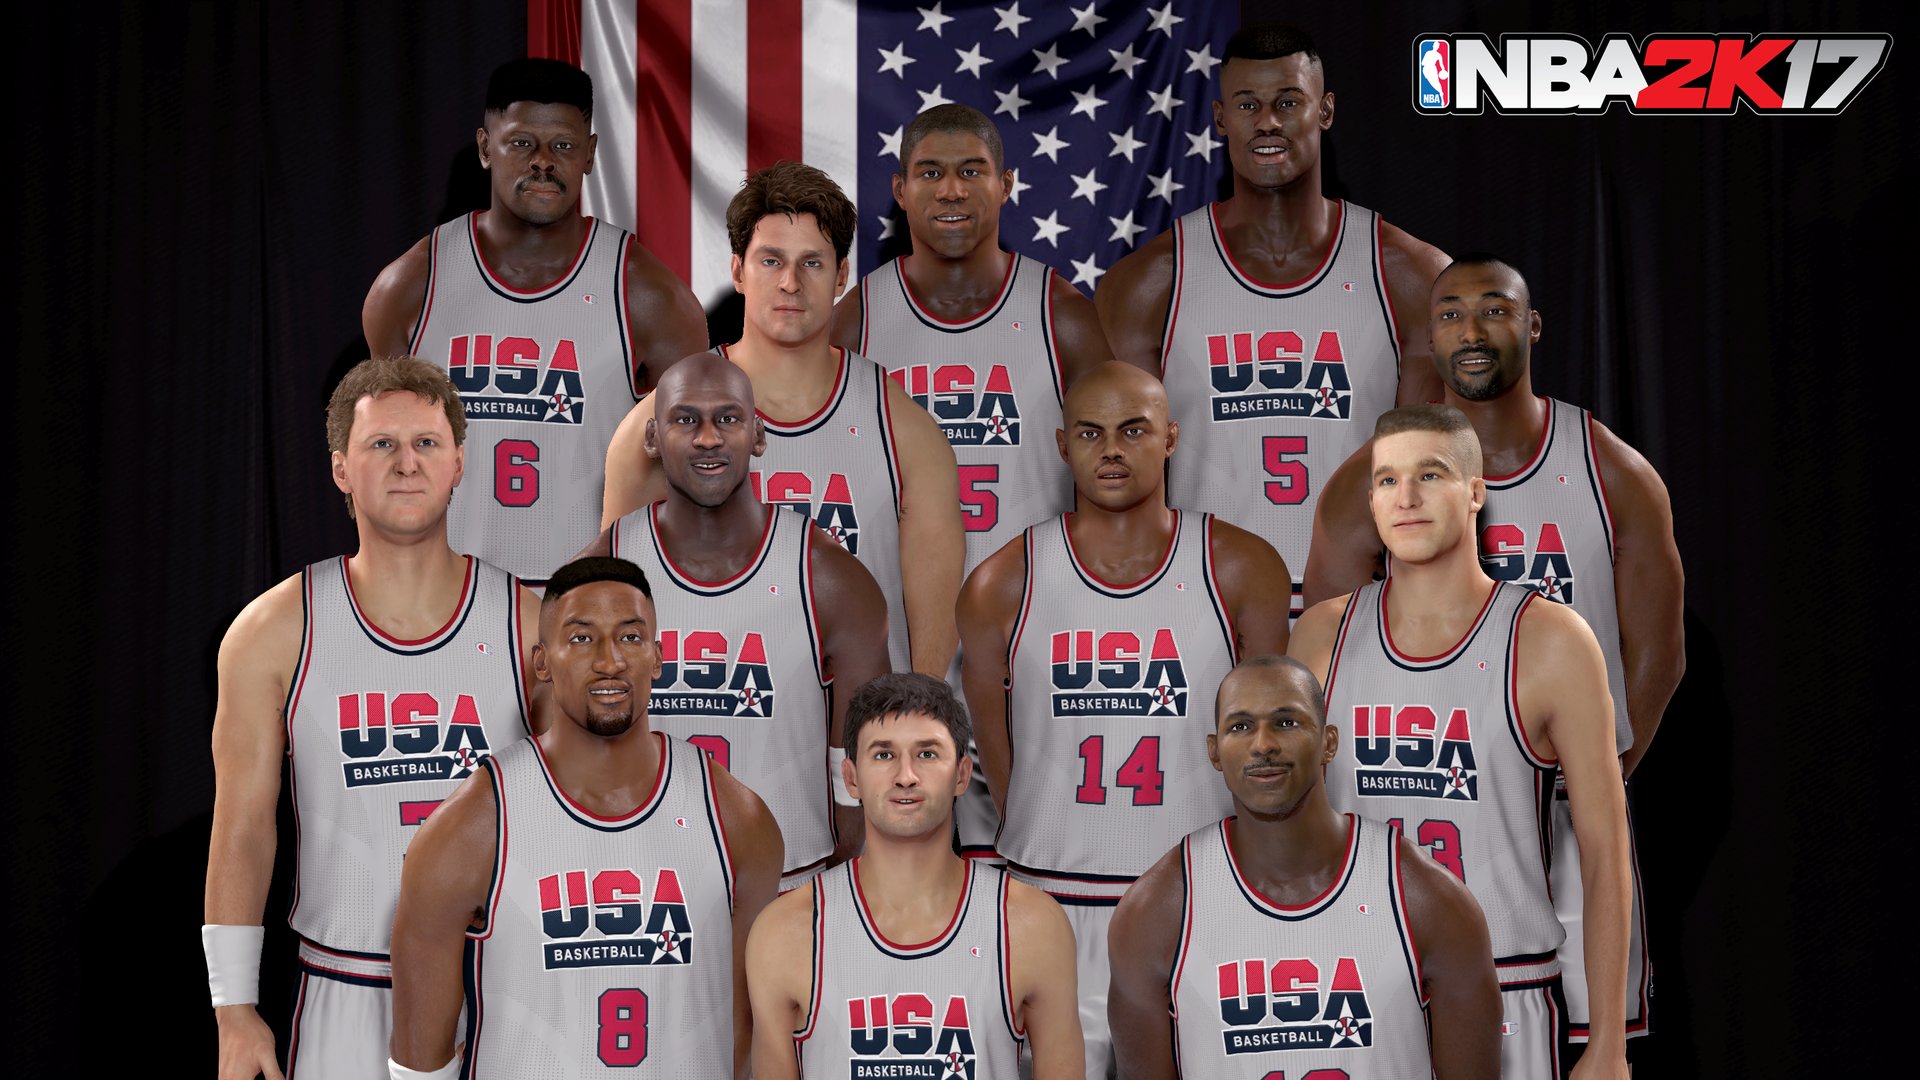 First Screenshots For Nba 2k17 Feature Team Usa For Rio Olympics And